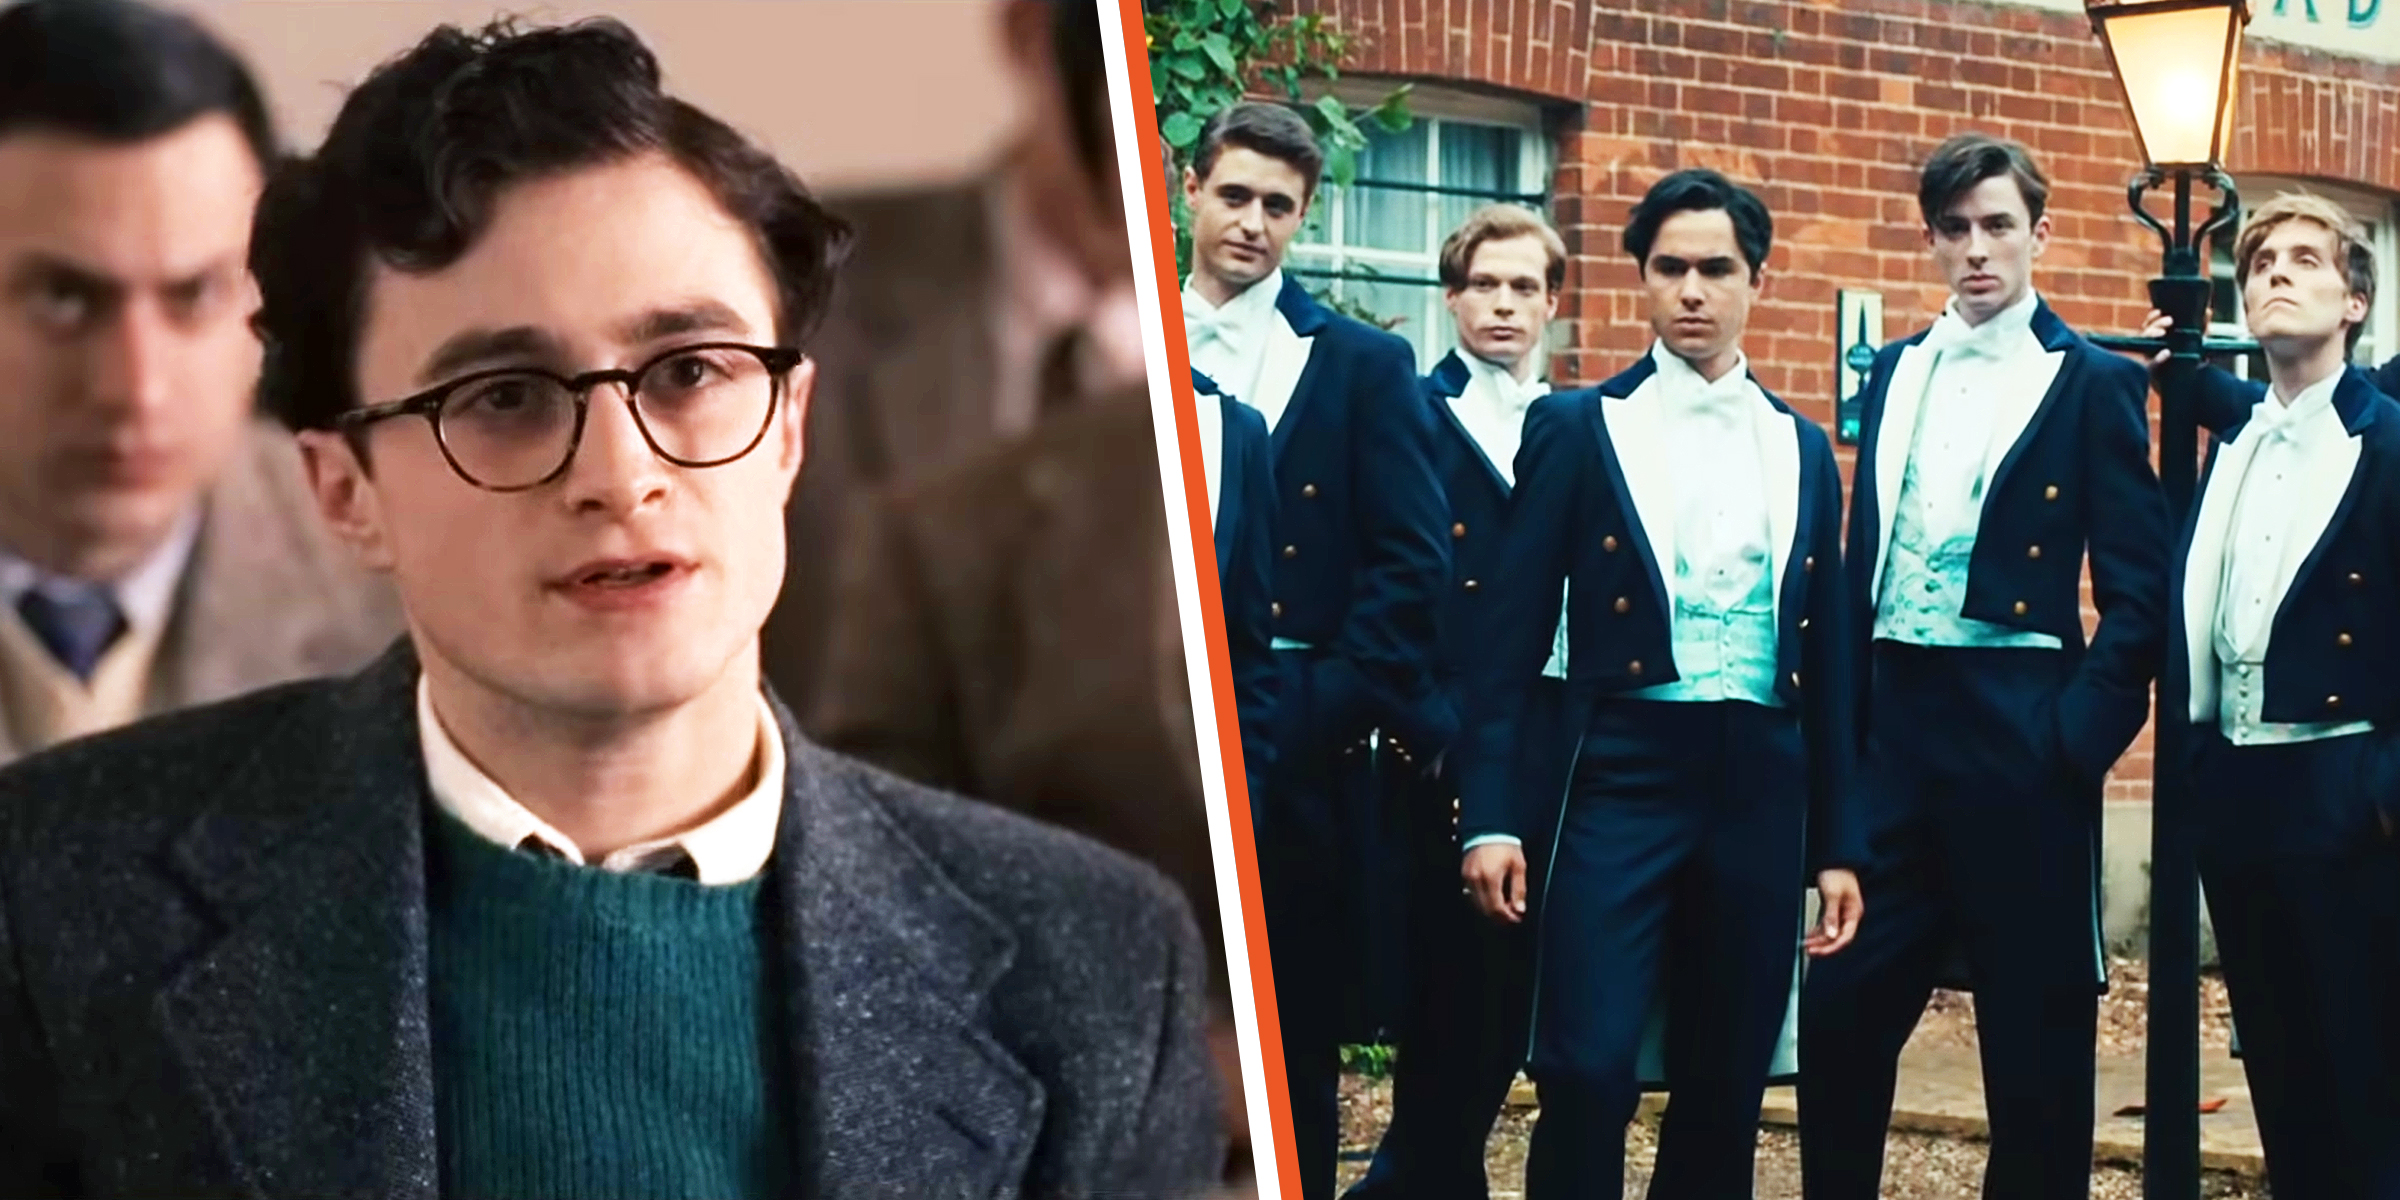 Daniel Radcliffe in "Kill Your Darlings." | The main cast of "The Riot Club." | Source: Sony Pictures Classics | Universal Pictures International